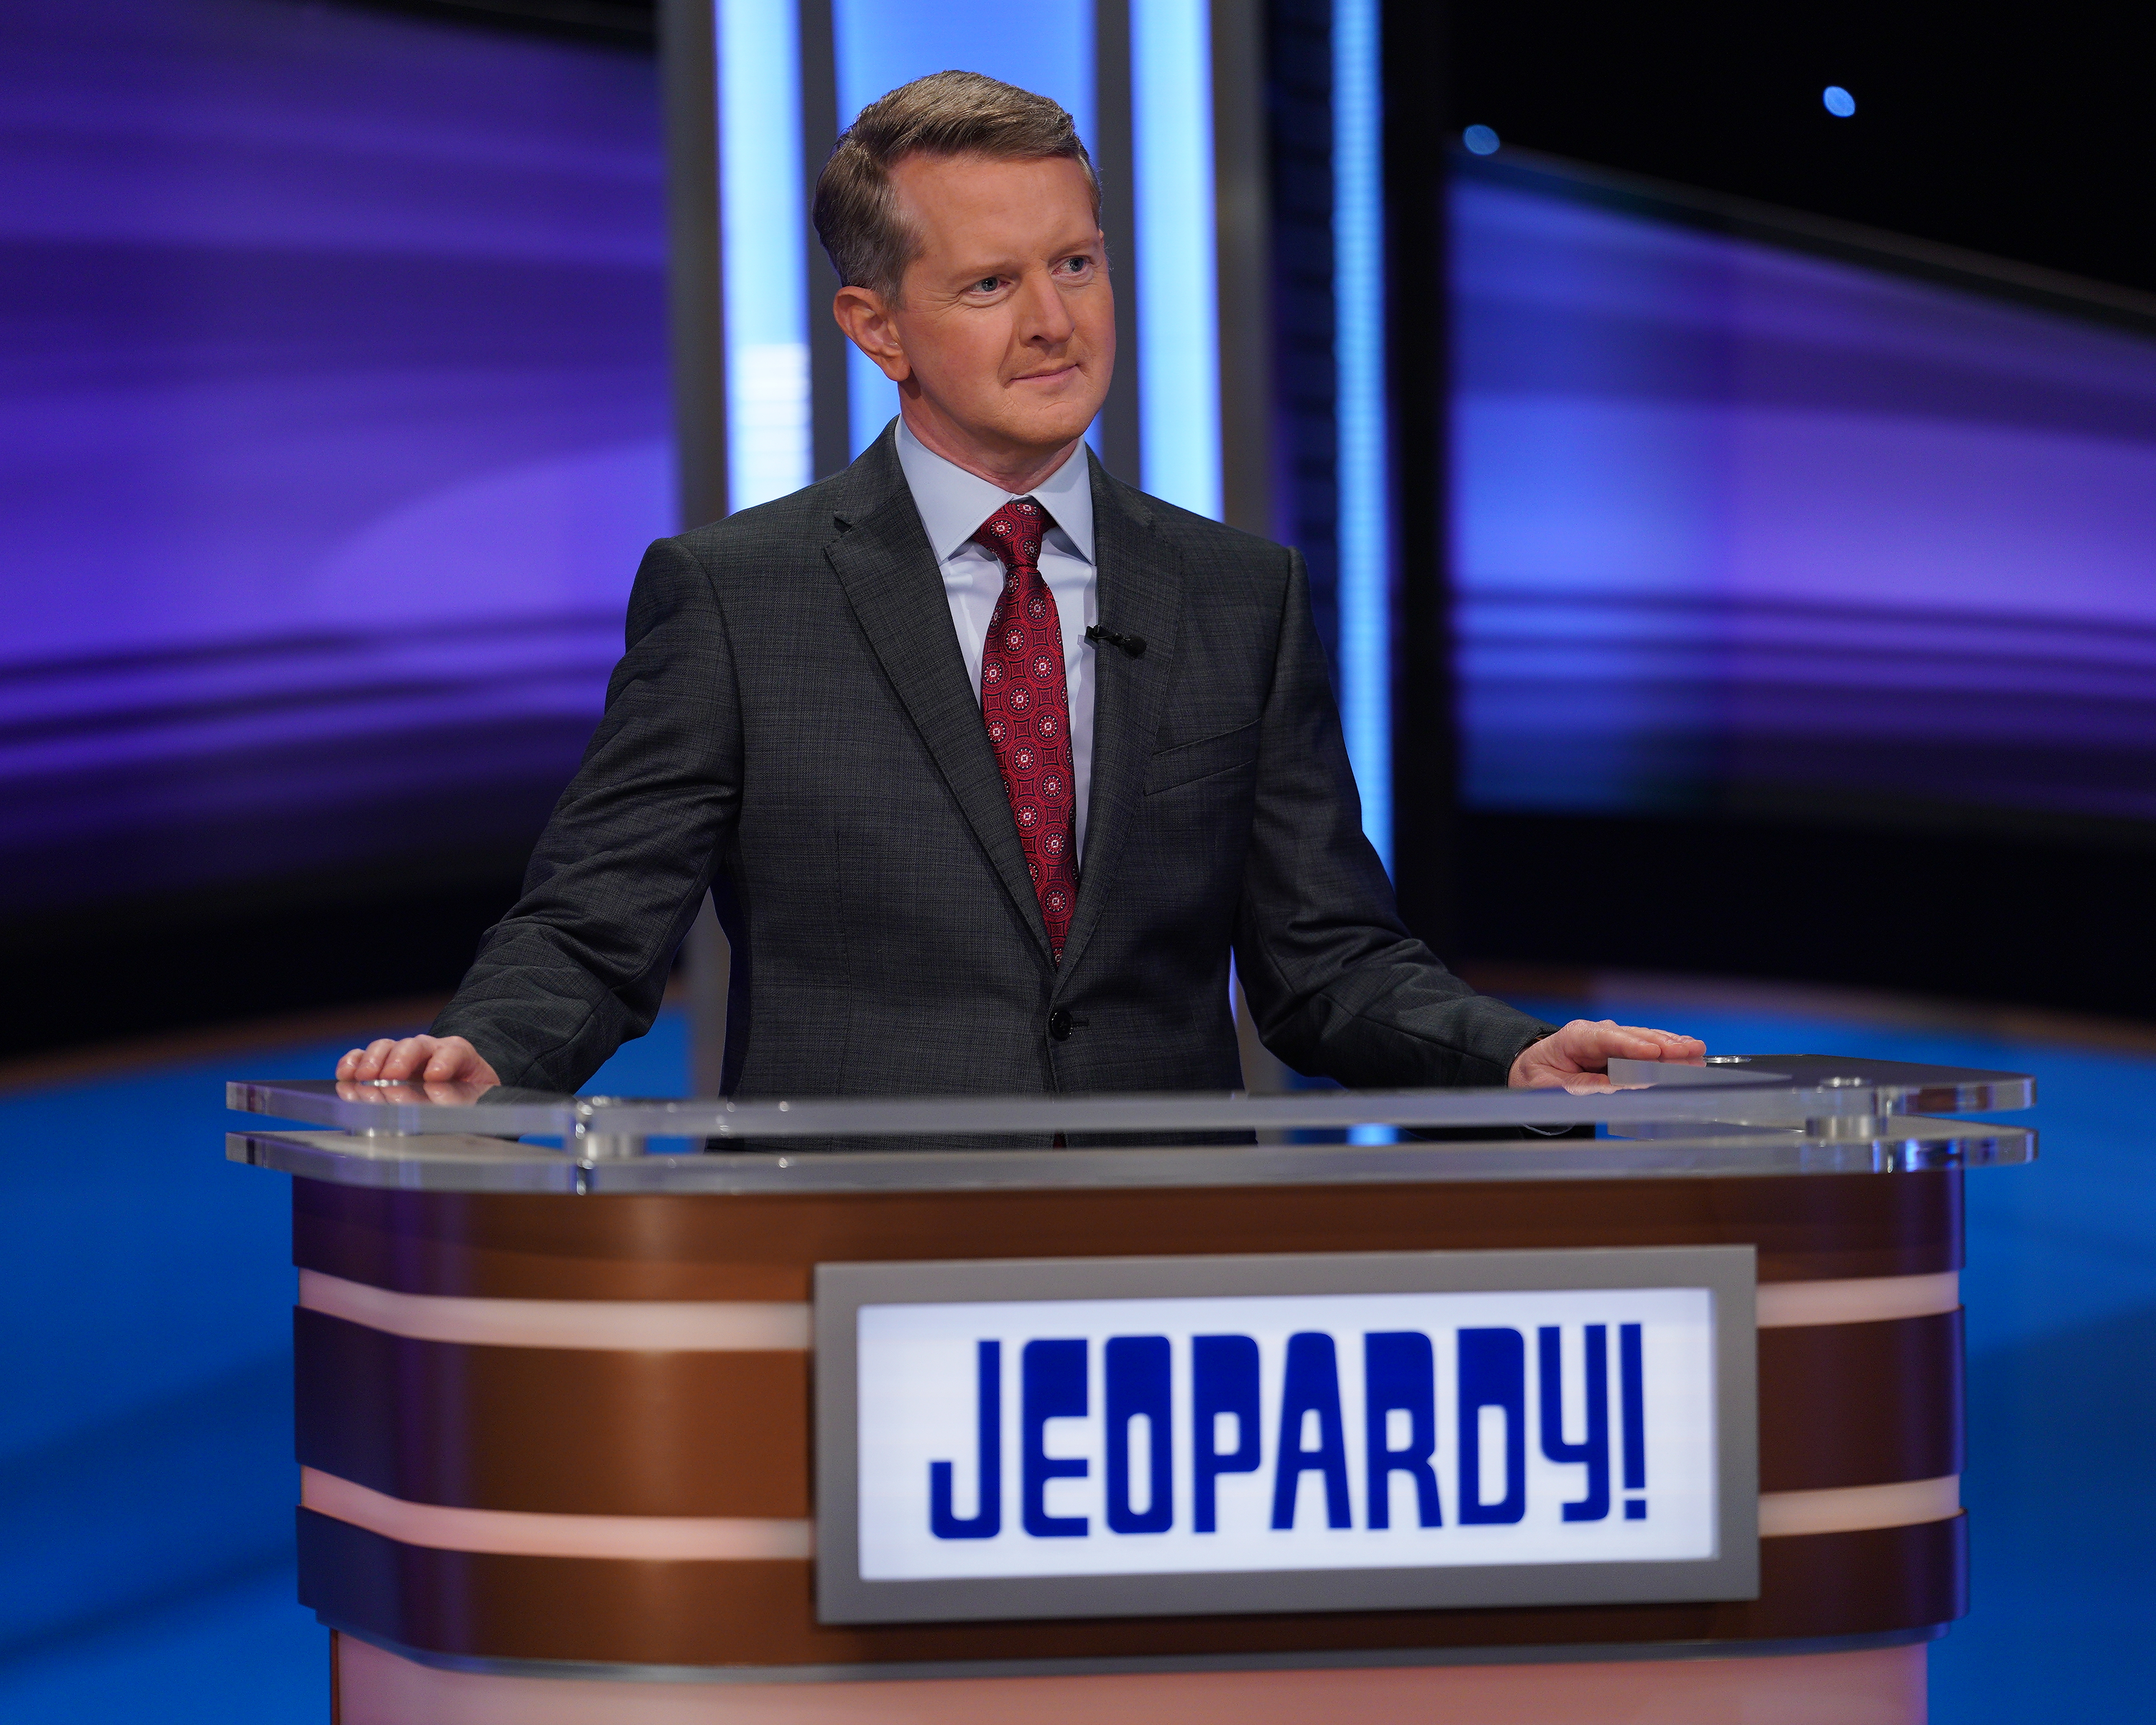 Fans online said the question was far too easy for Final Jeopardy